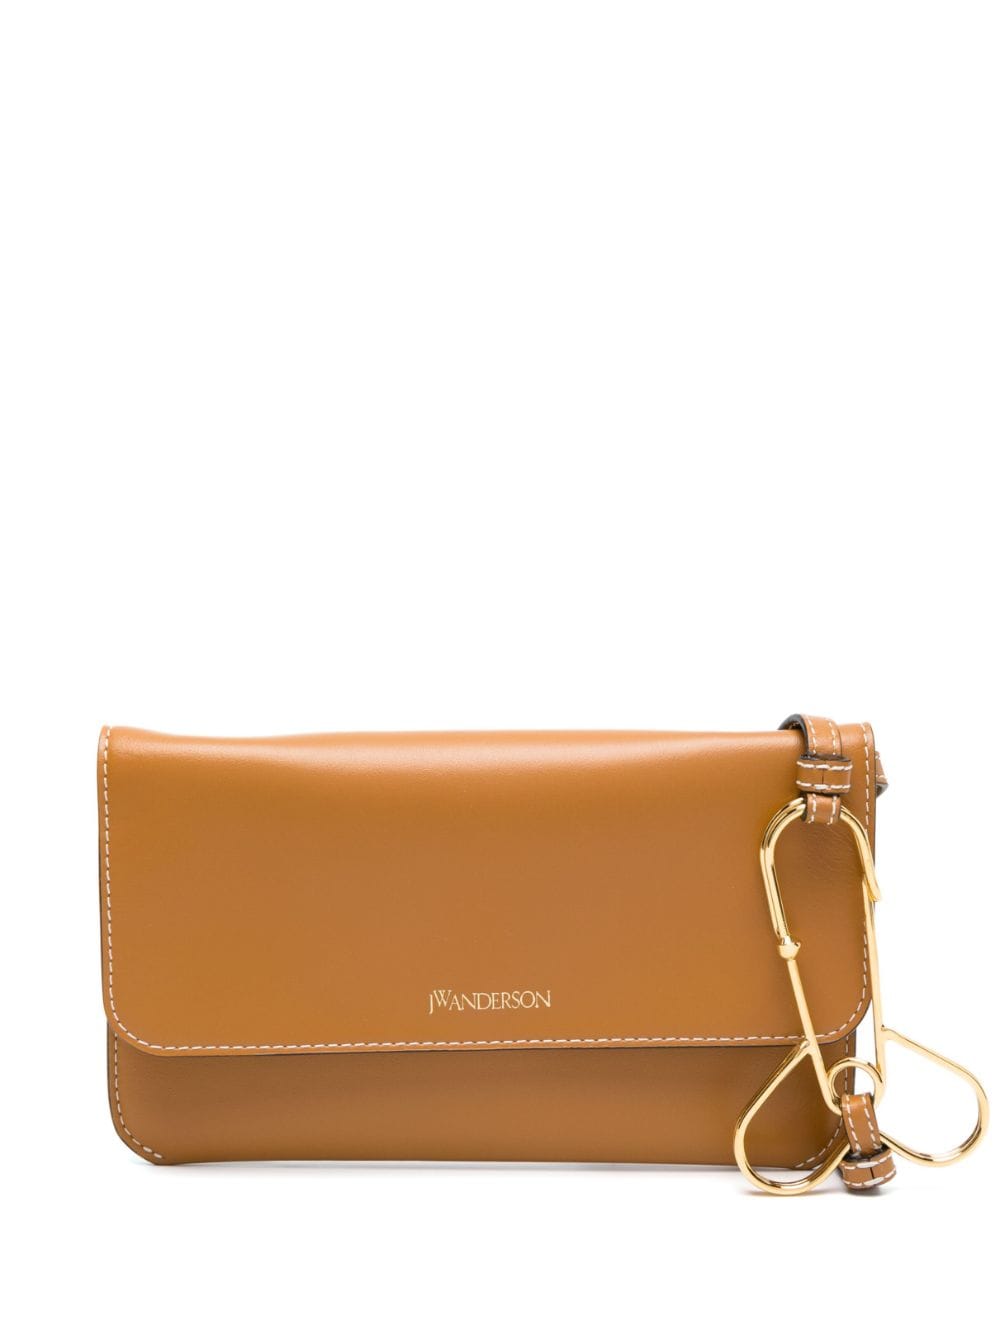 JW Anderson phone leather pouch bag - Brown von JW Anderson